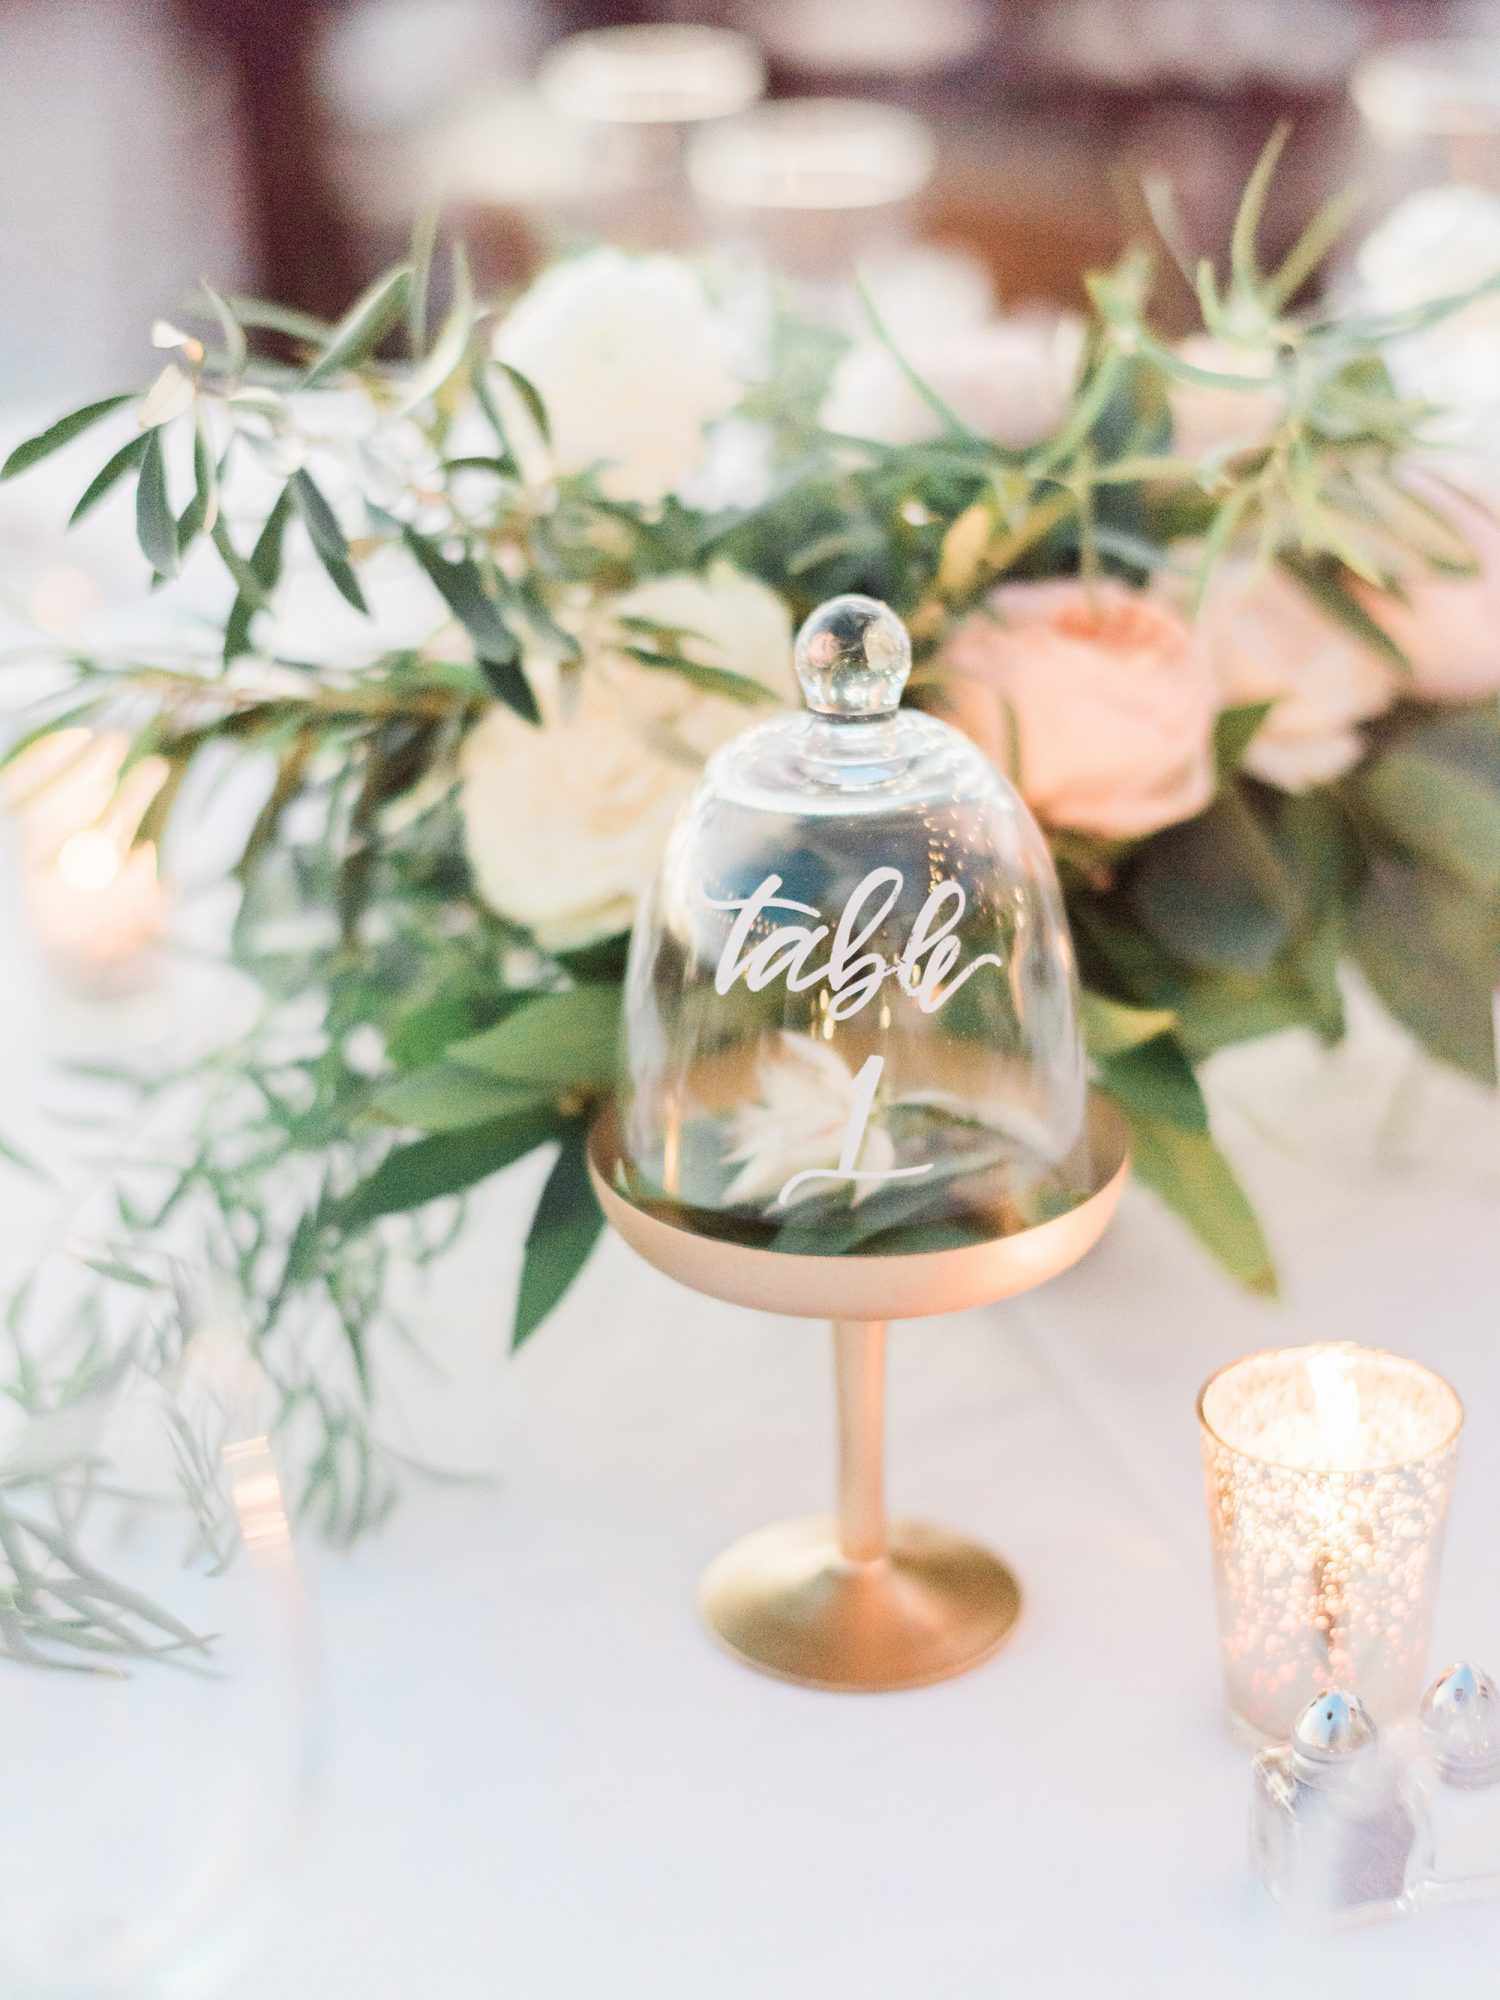 Elegant cloche and flower wedding table number with calligraphy